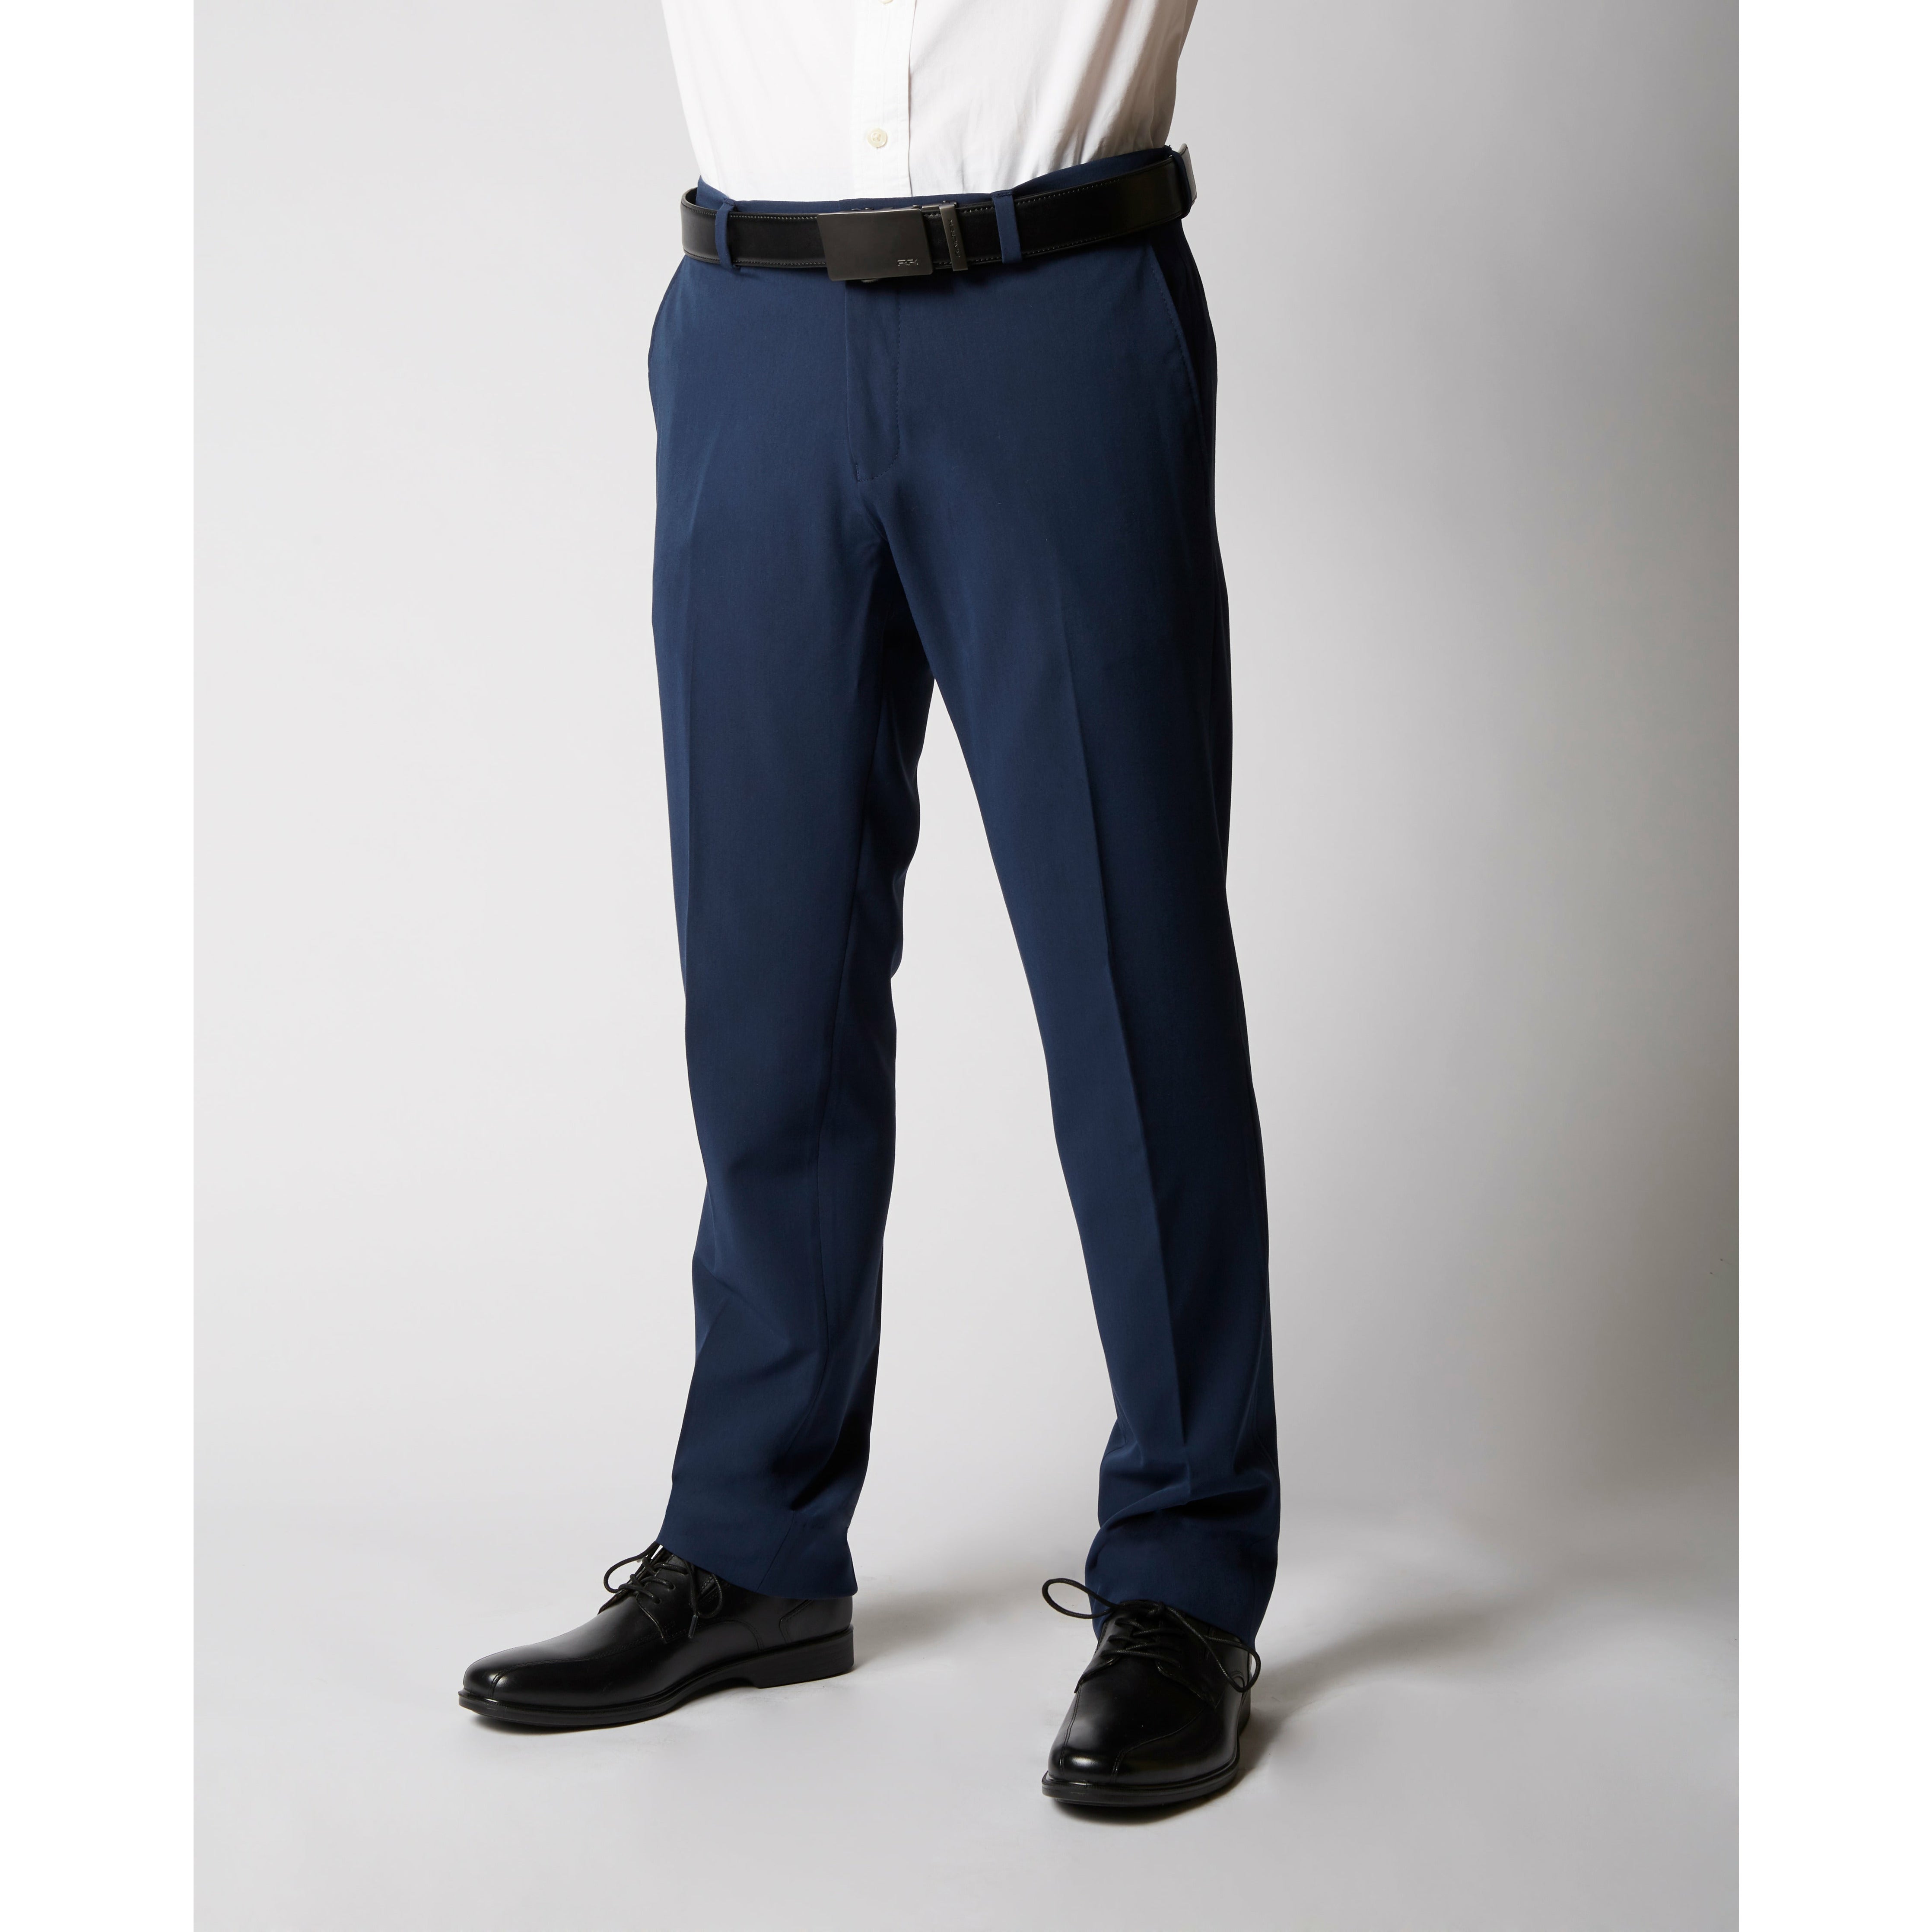 Basics Casual Trousers : Buy Basics Tapered Fit Mallar Blue Stretch Trouser  Online | Nykaa Fashion